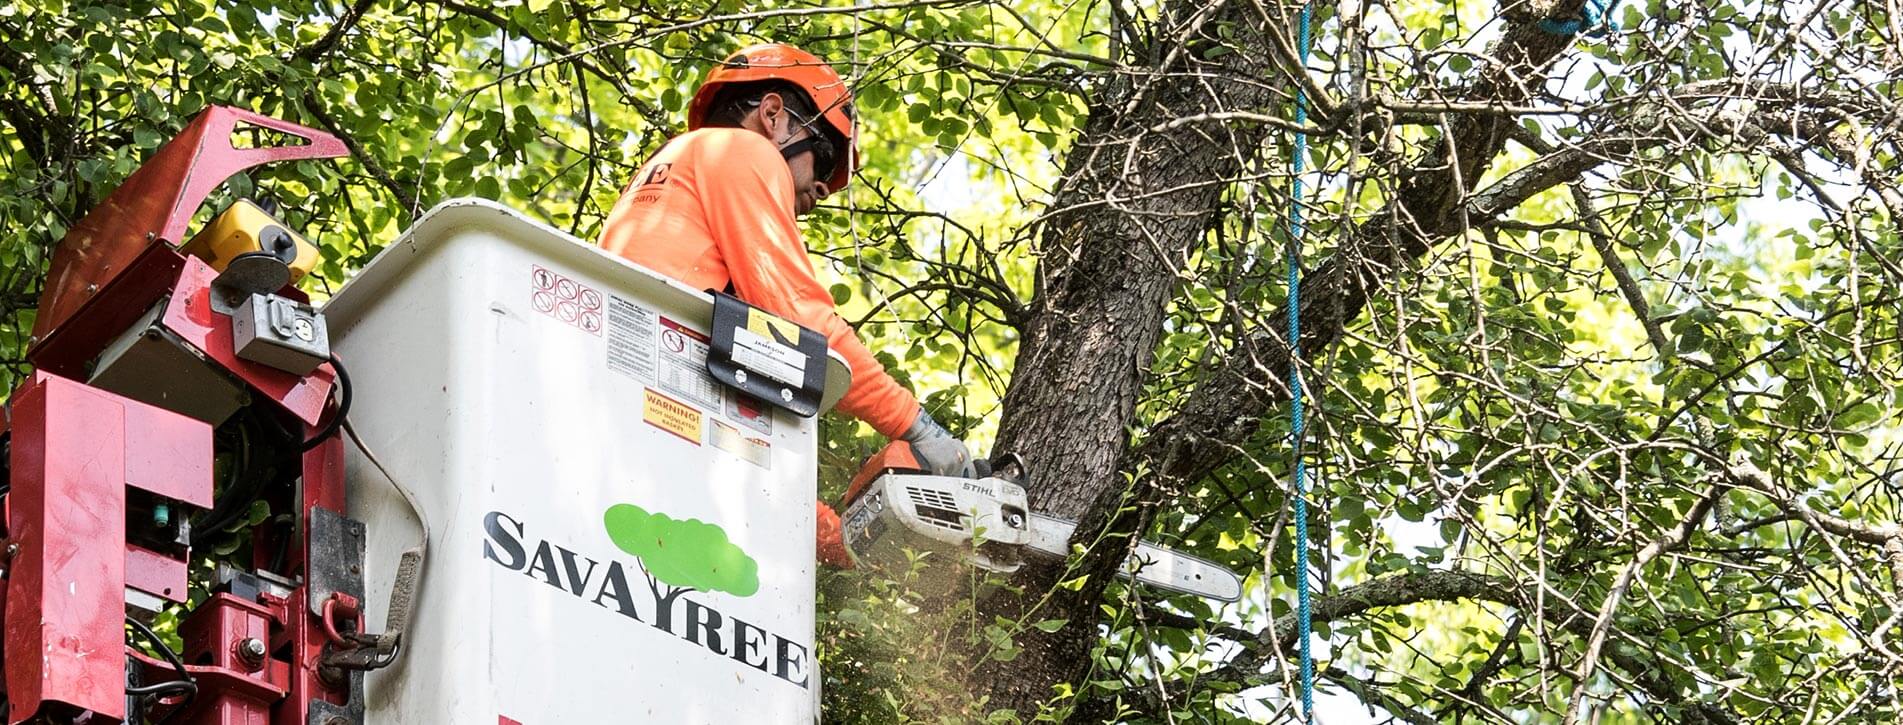 Arborist Consultations-West Palm Beach Tree Trimming and Tree Removal Services-We Offer Tree Trimming Services, Tree Removal, Tree Pruning, Tree Cutting, Residential and Commercial Tree Trimming Services, Storm Damage, Emergency Tree Removal, Land Clearing, Tree Companies, Tree Care Service, Stump Grinding, and we're the Best Tree Trimming Company Near You Guaranteed!